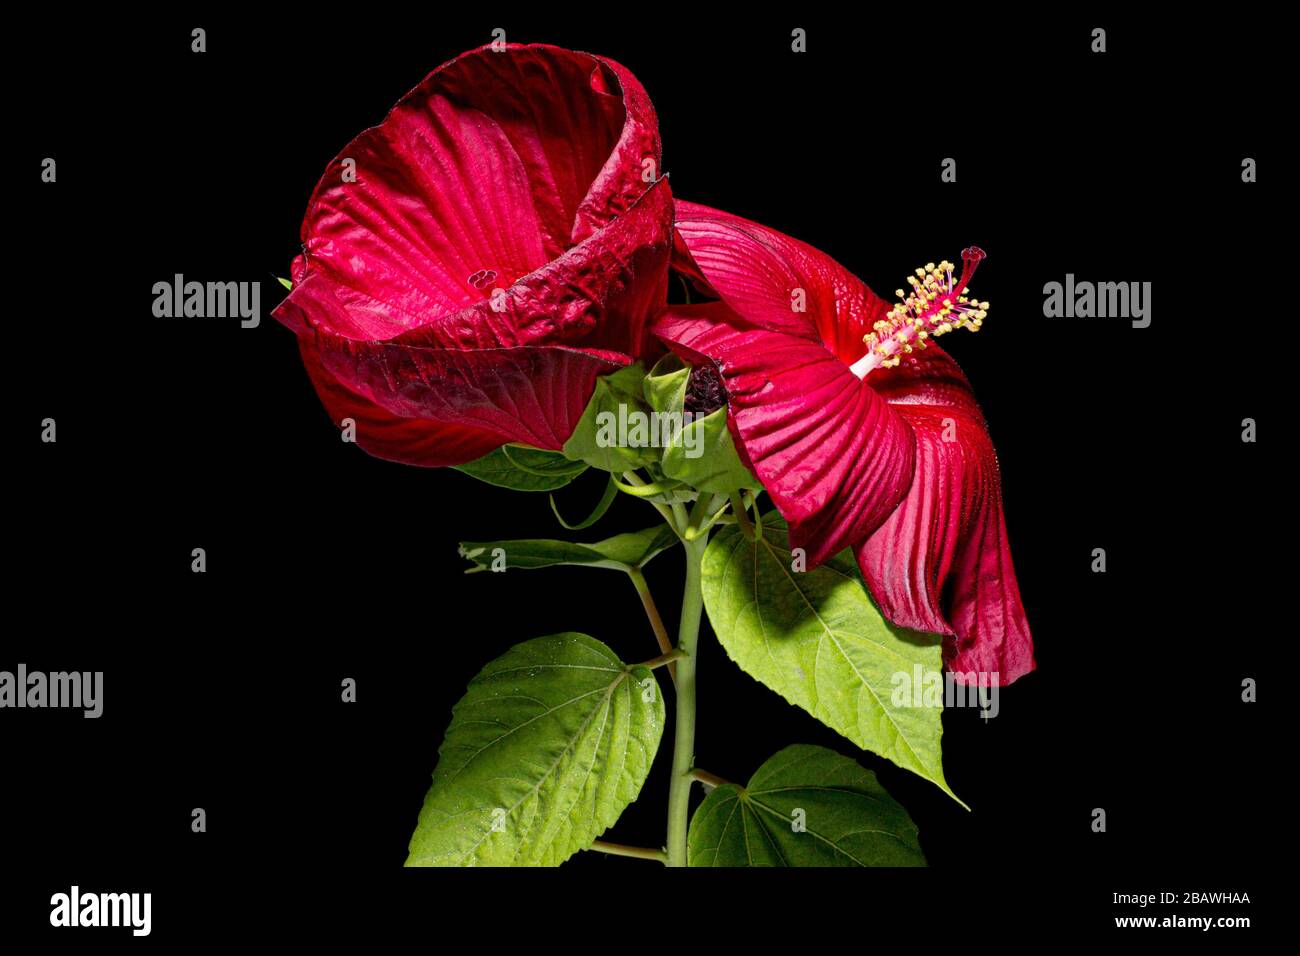 Two blooming flowers of hibiscus, isolated on black background Stock Photo